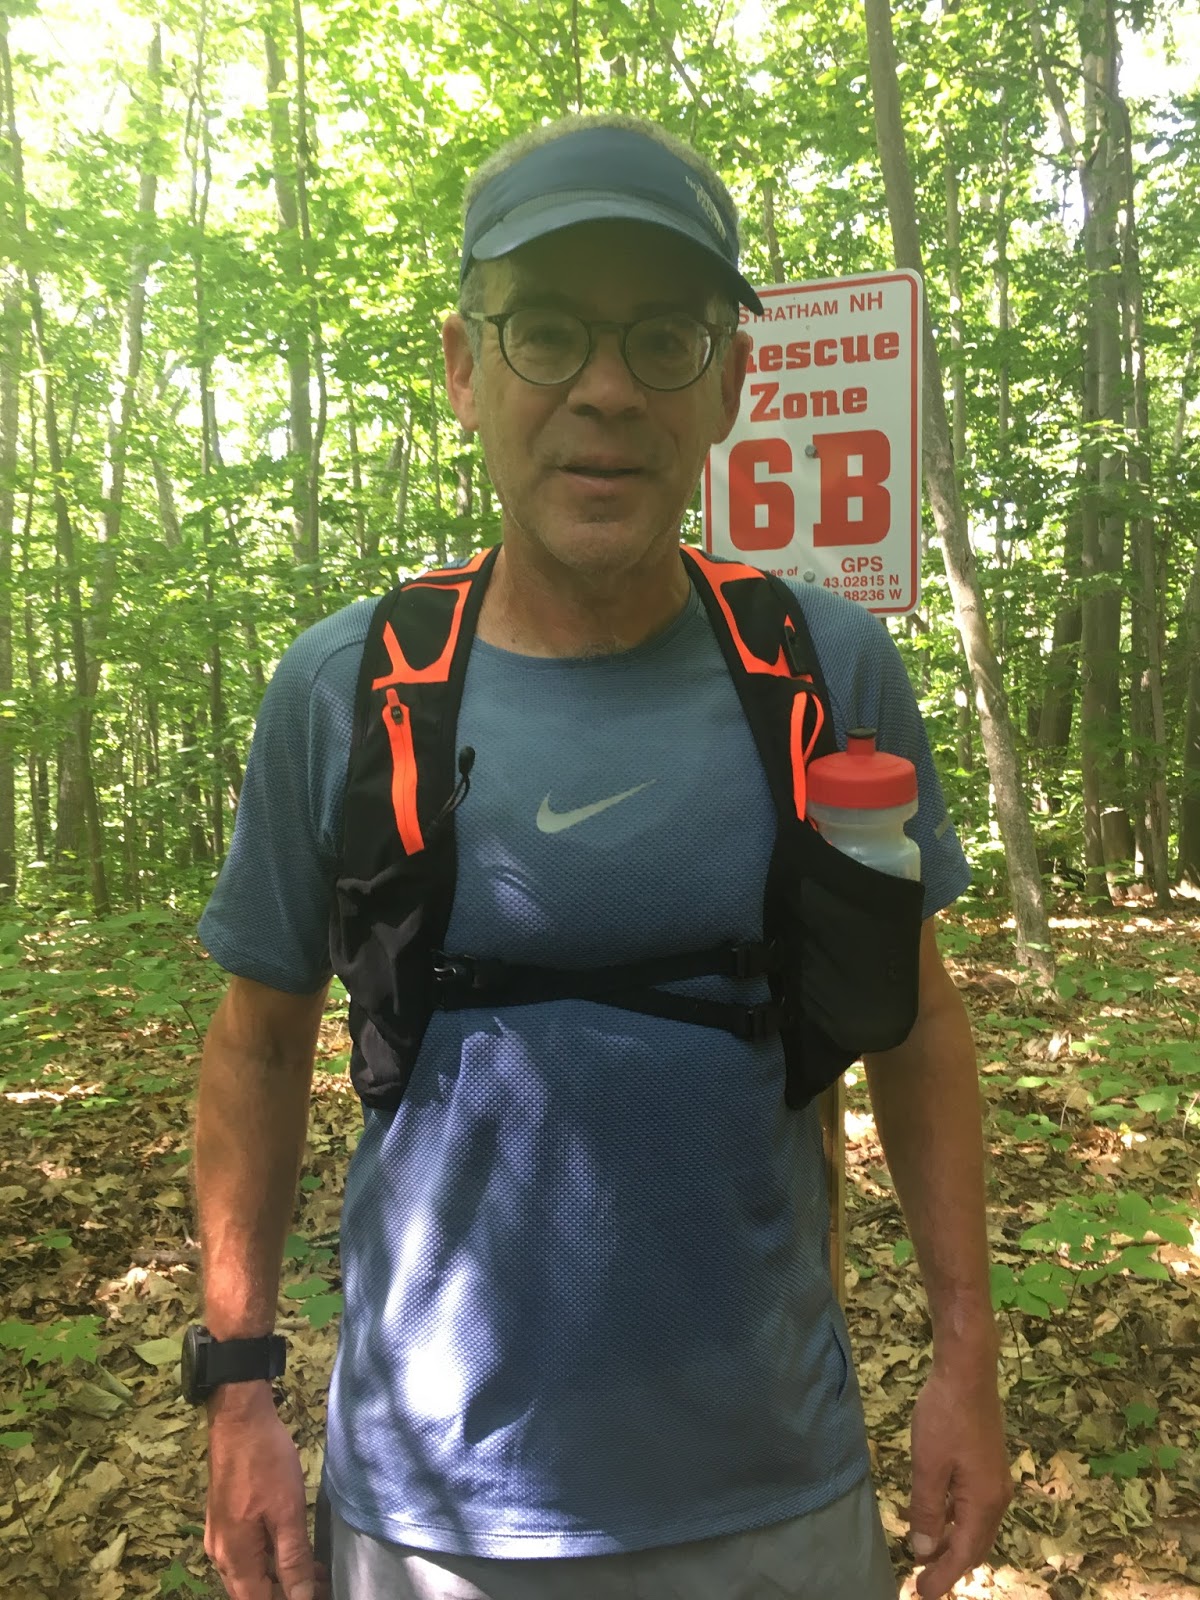 Road Trail Run: Review Nike Trail Kiger as a Bug in High Performance Hydration Vest